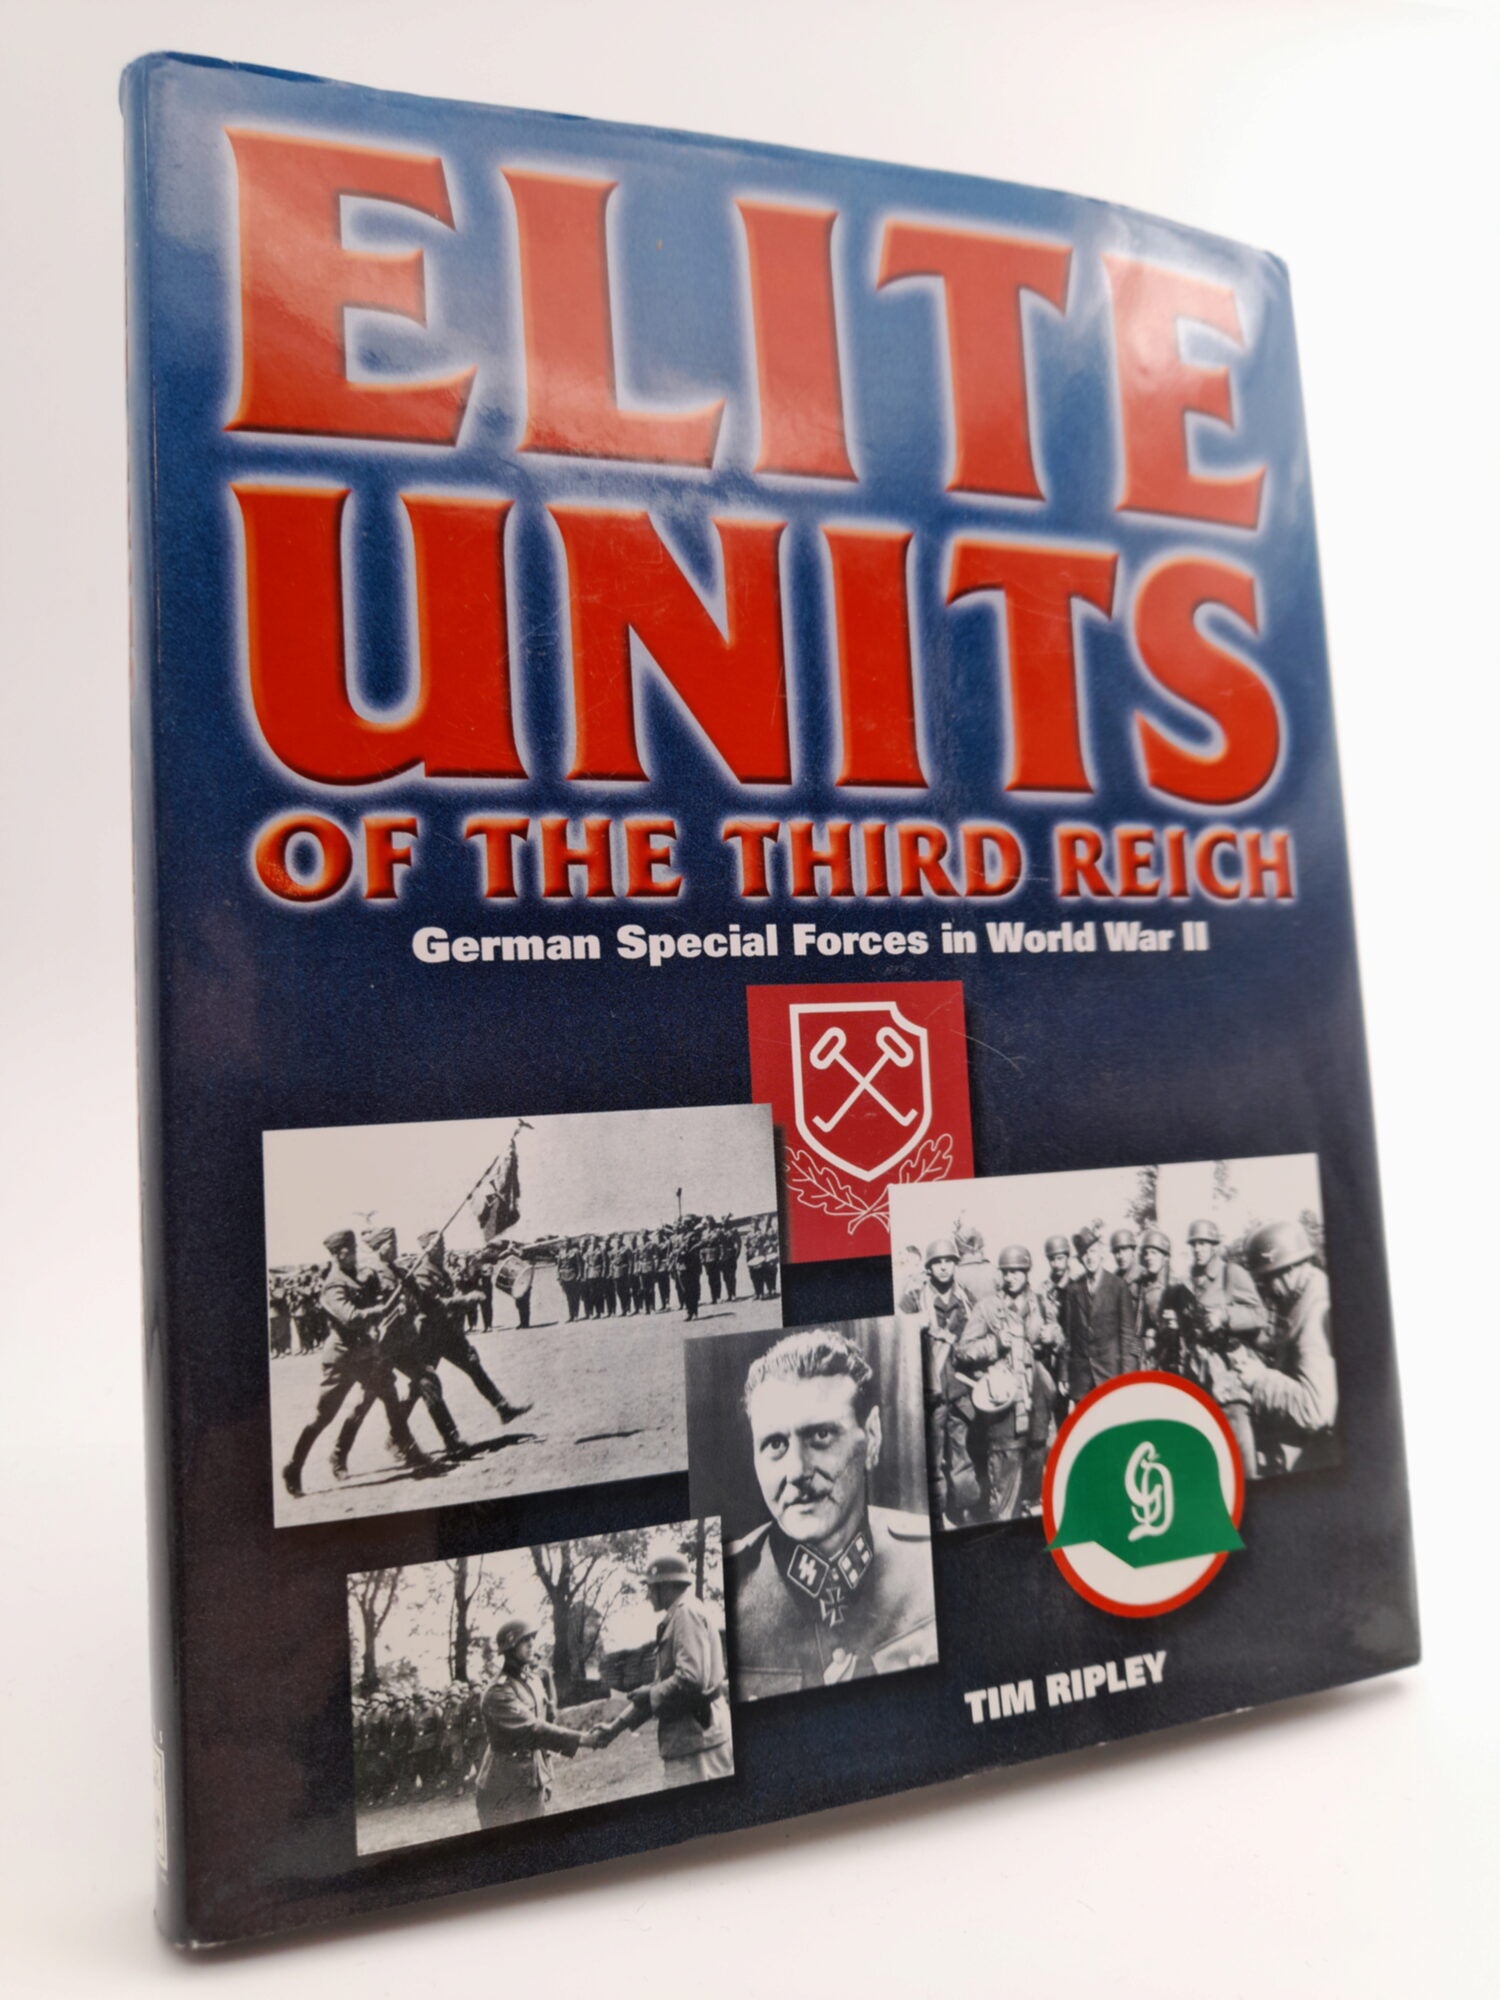 Ripley, Tim | Elite units of the third reich : German Special Forces in World War II